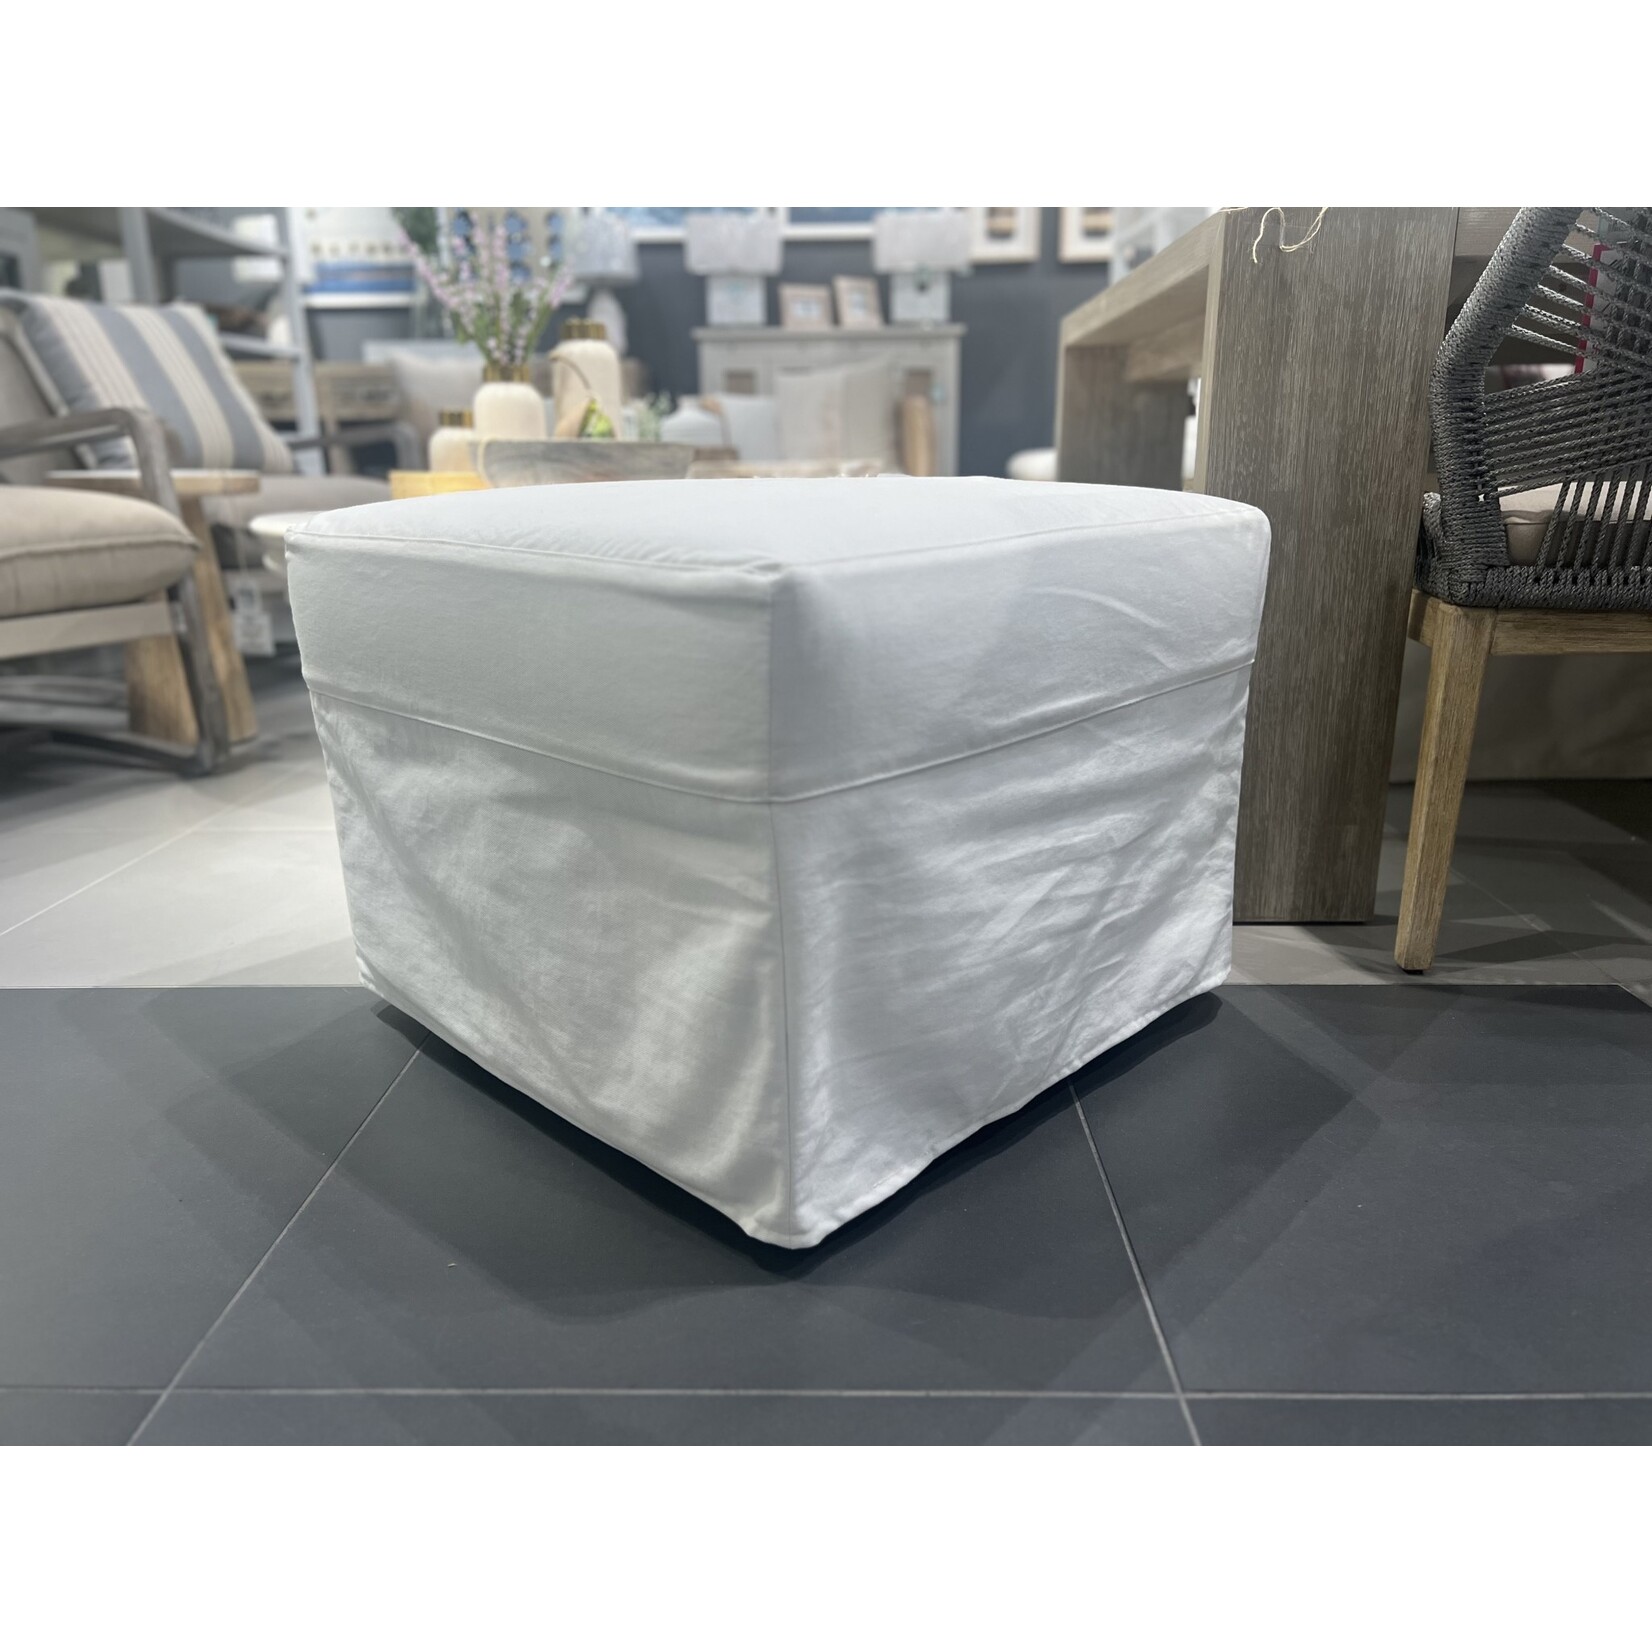 Outside The Box 24x24 Harper Twill Bleach Performance Slipcover Ottoman With Locking Castors